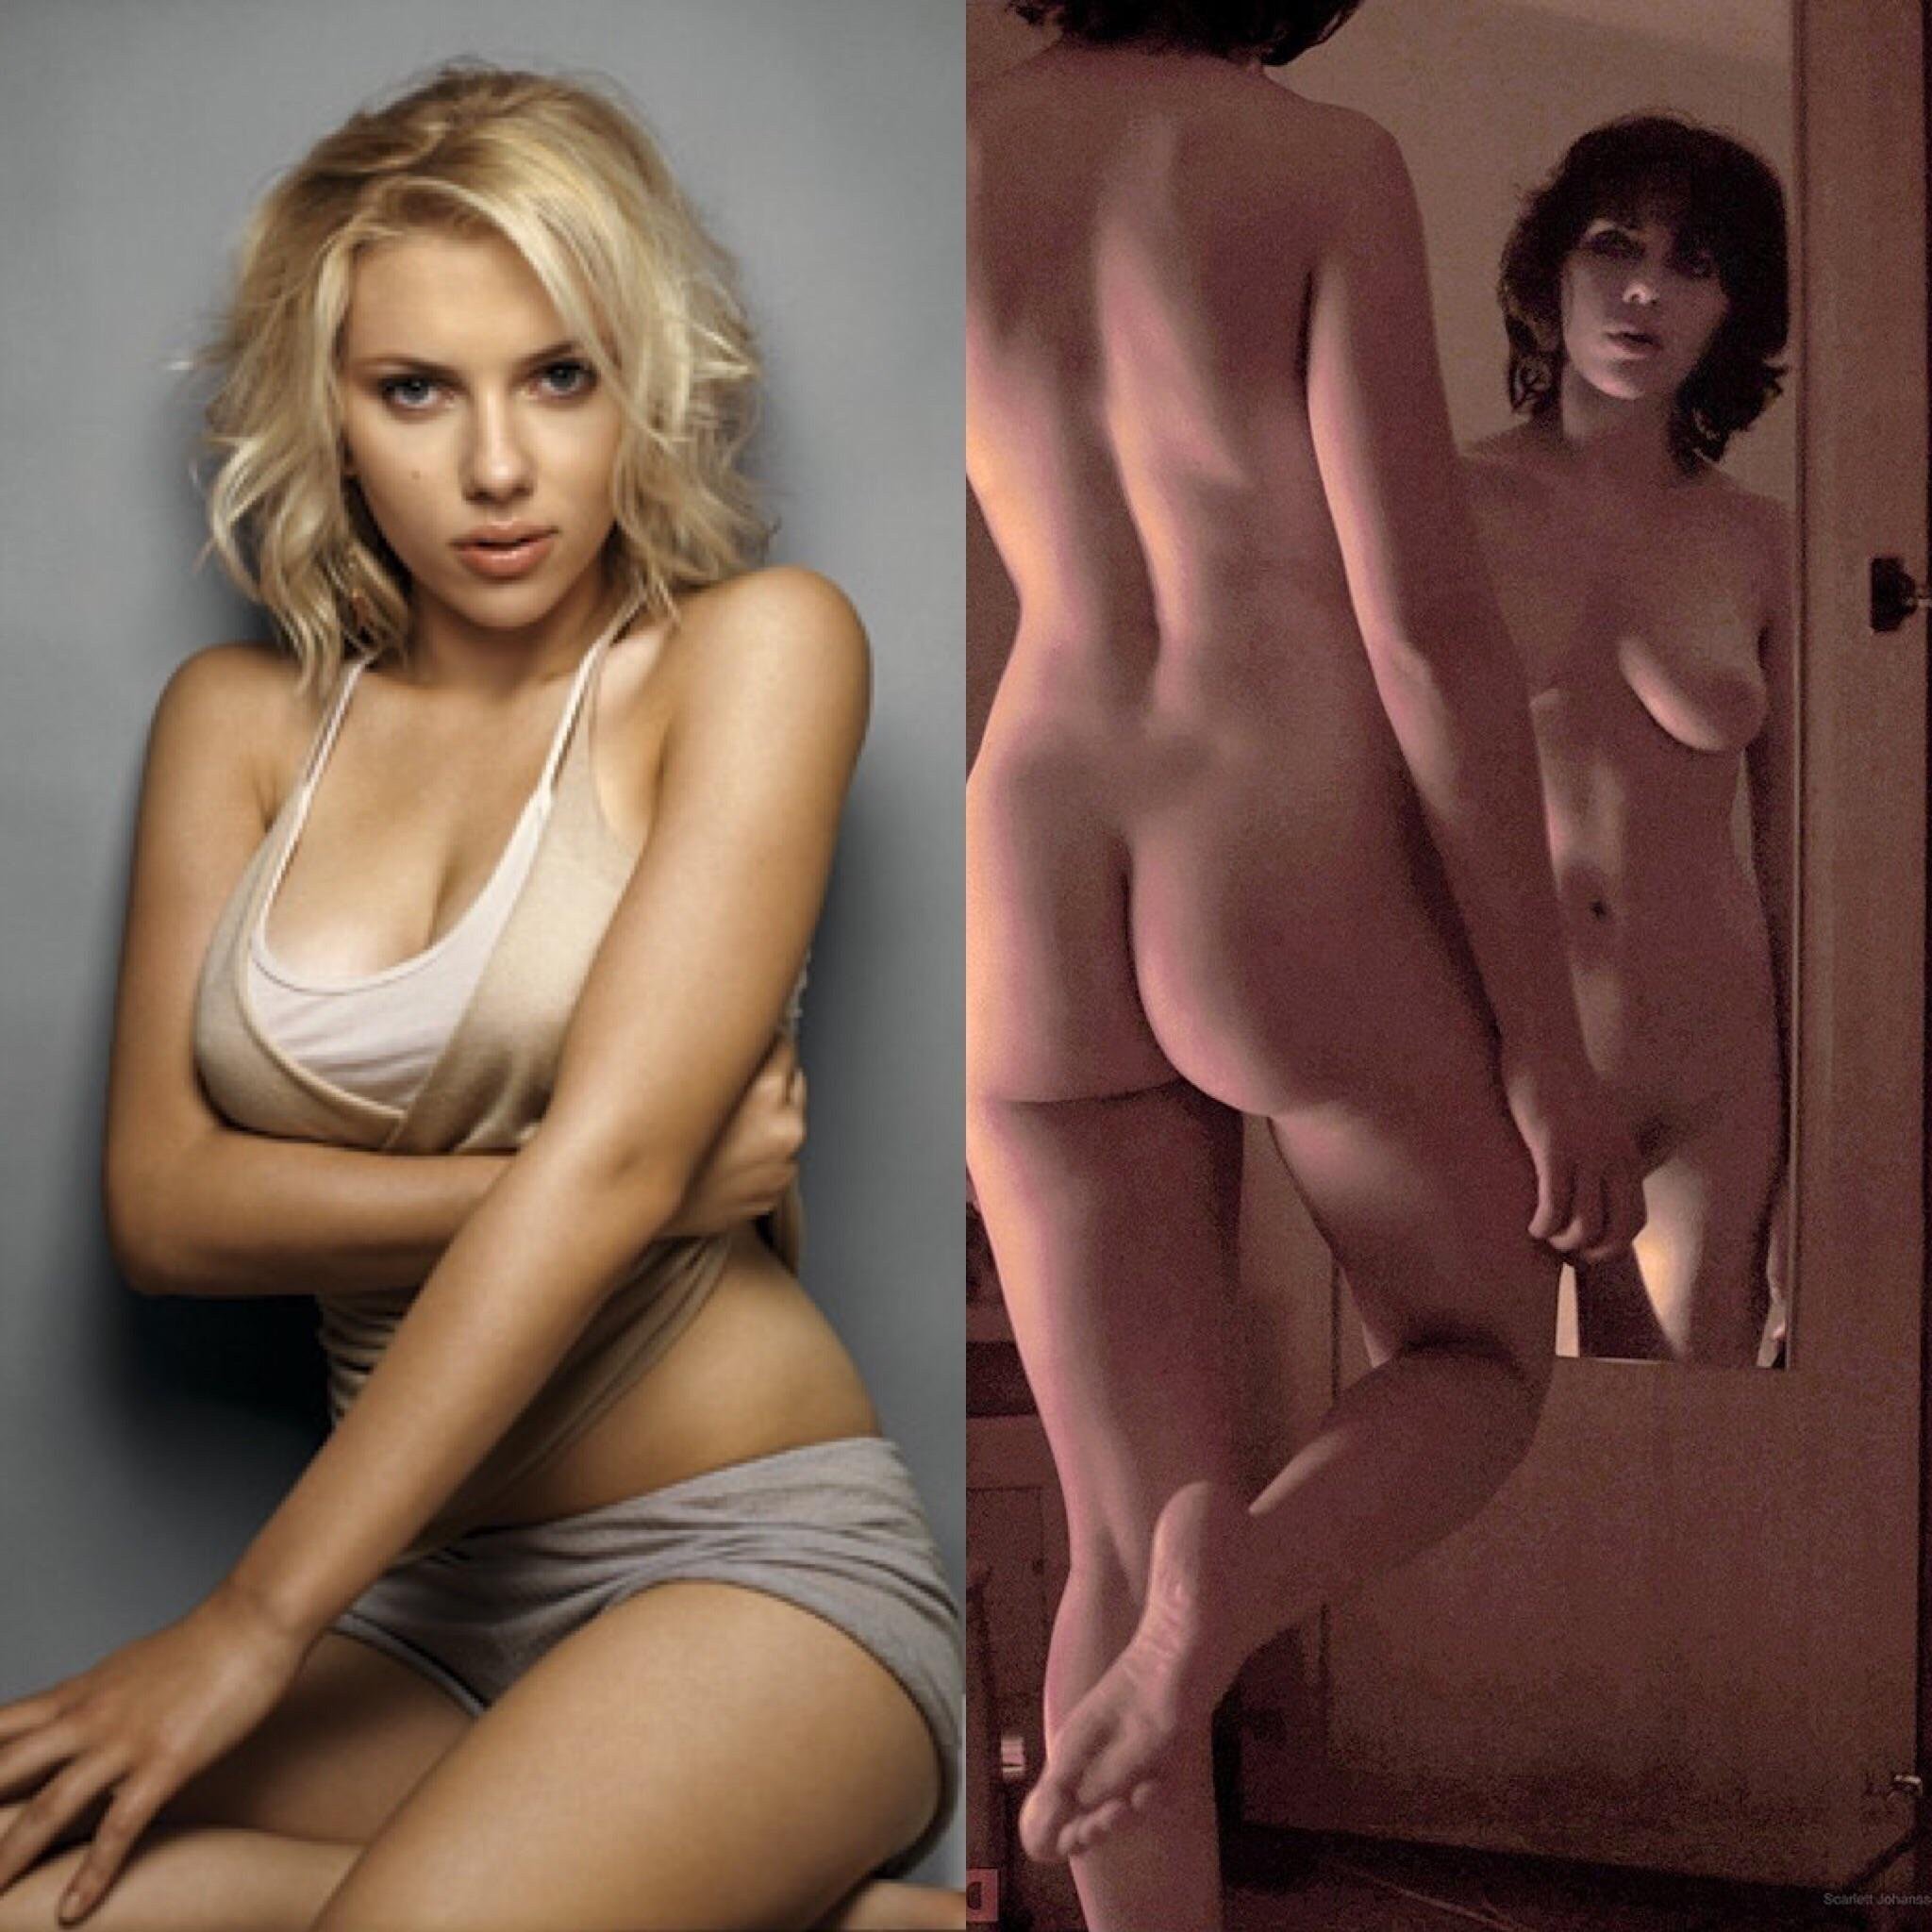 don couch add scarlett johansson hot naked photo